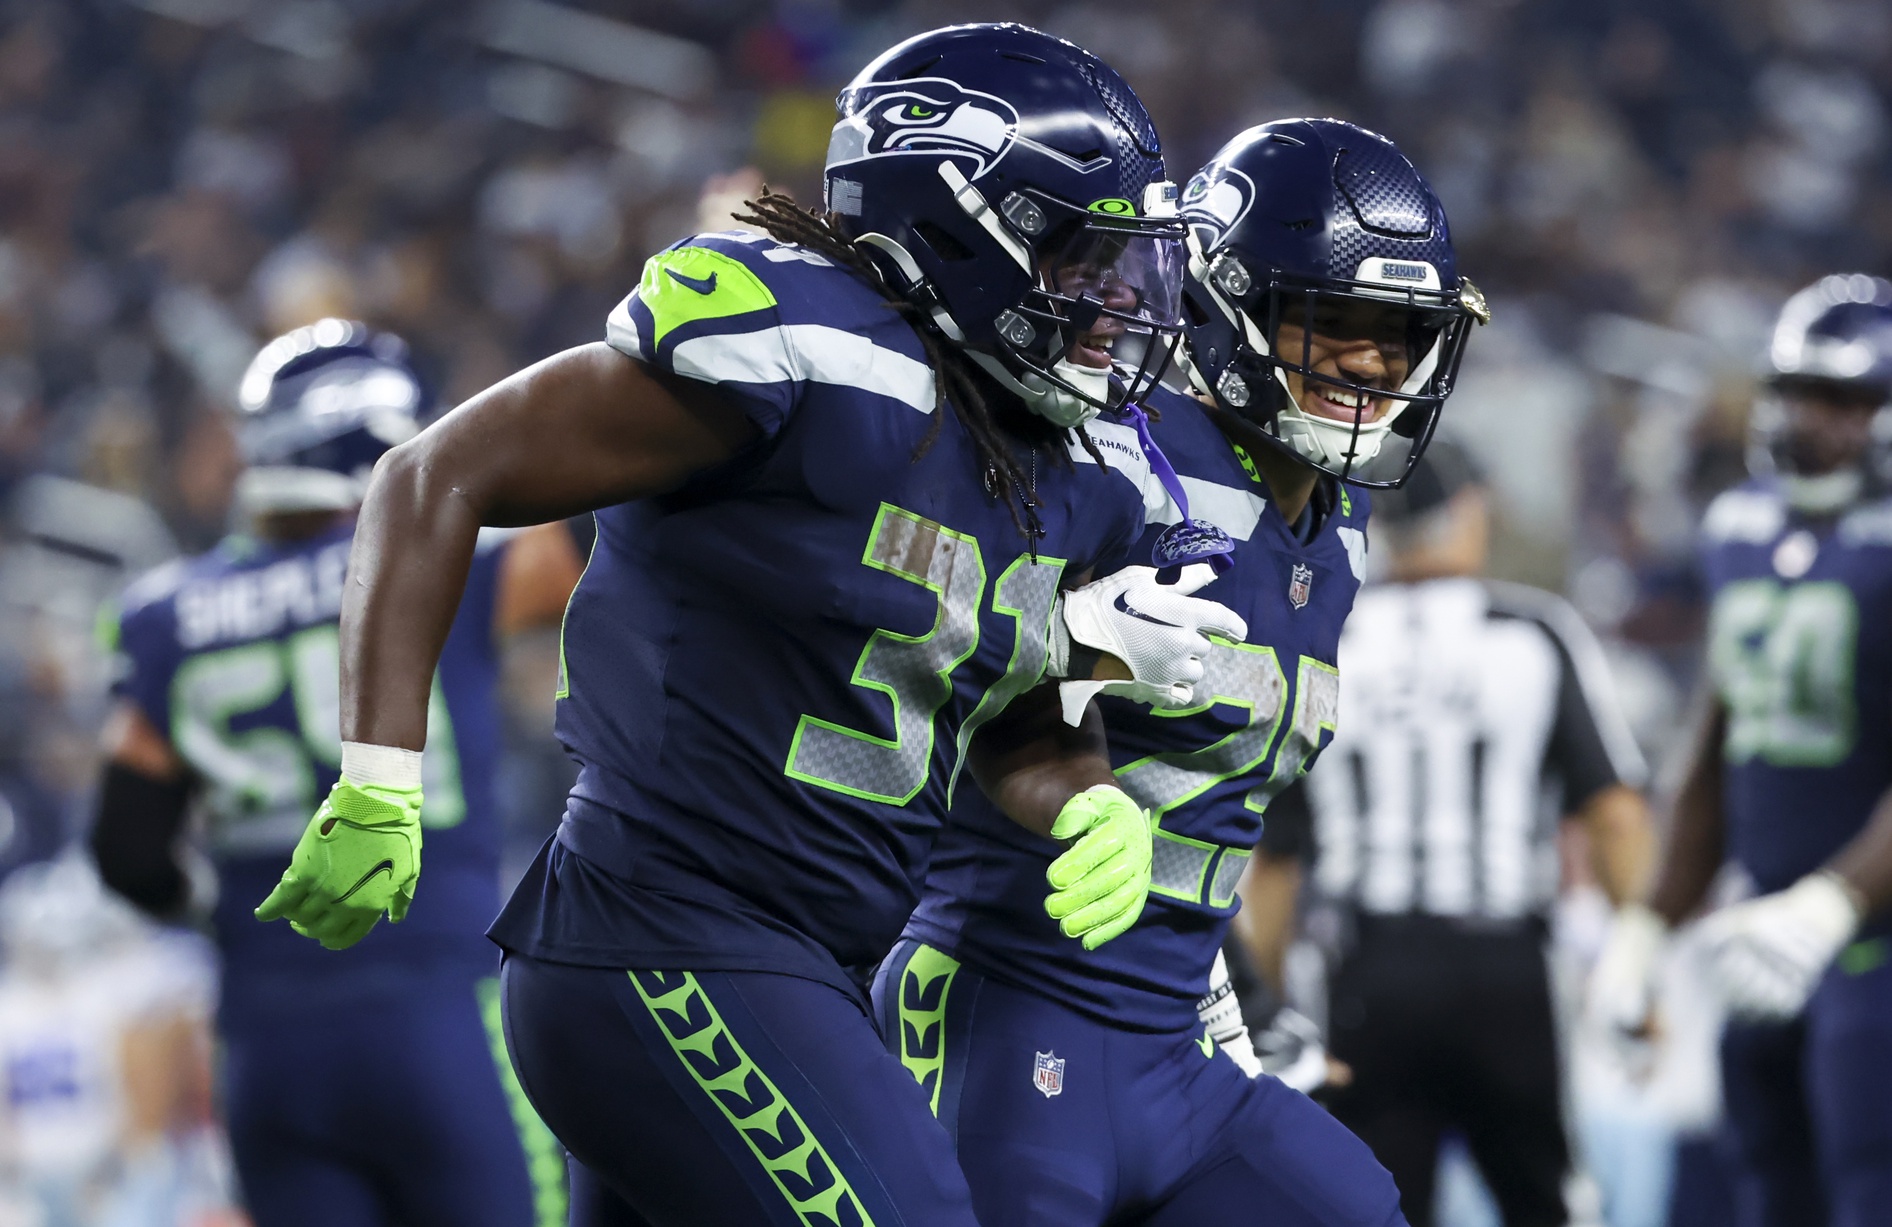 Seahawks uniforms come in at No. 5 on Touchdown Wire's rankings